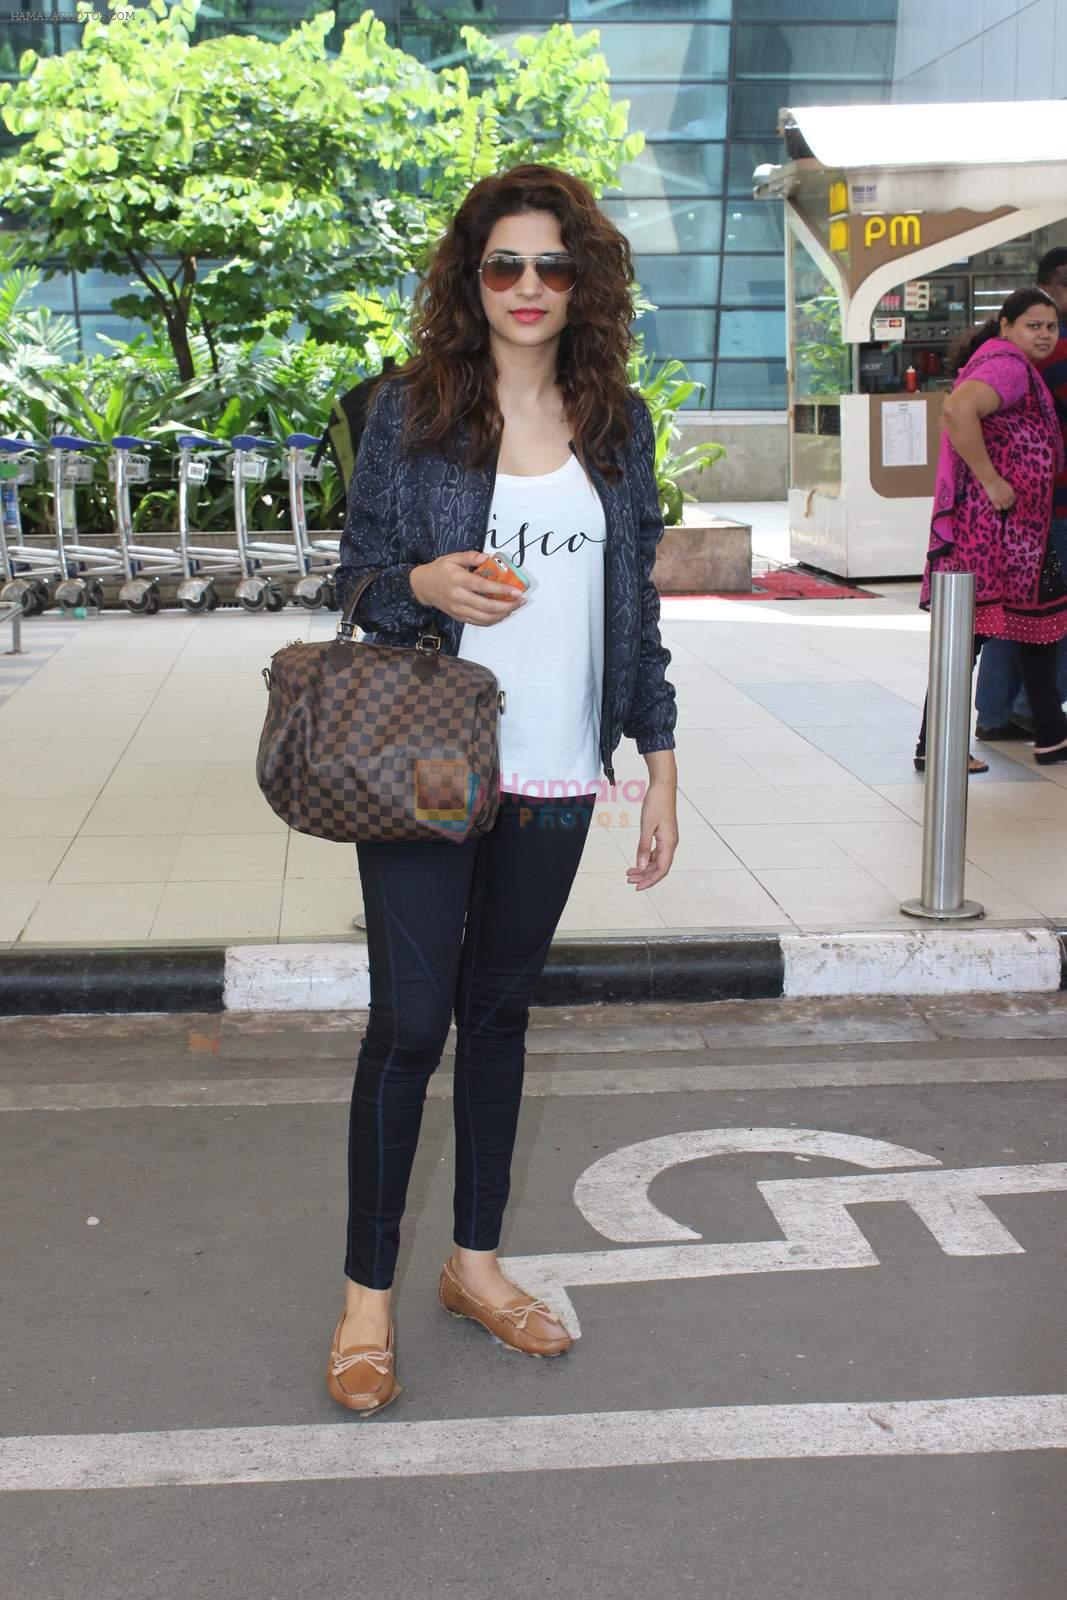 Kangana Ranaut leaves for Luknow for the HT Summit on 25th Sept 2015